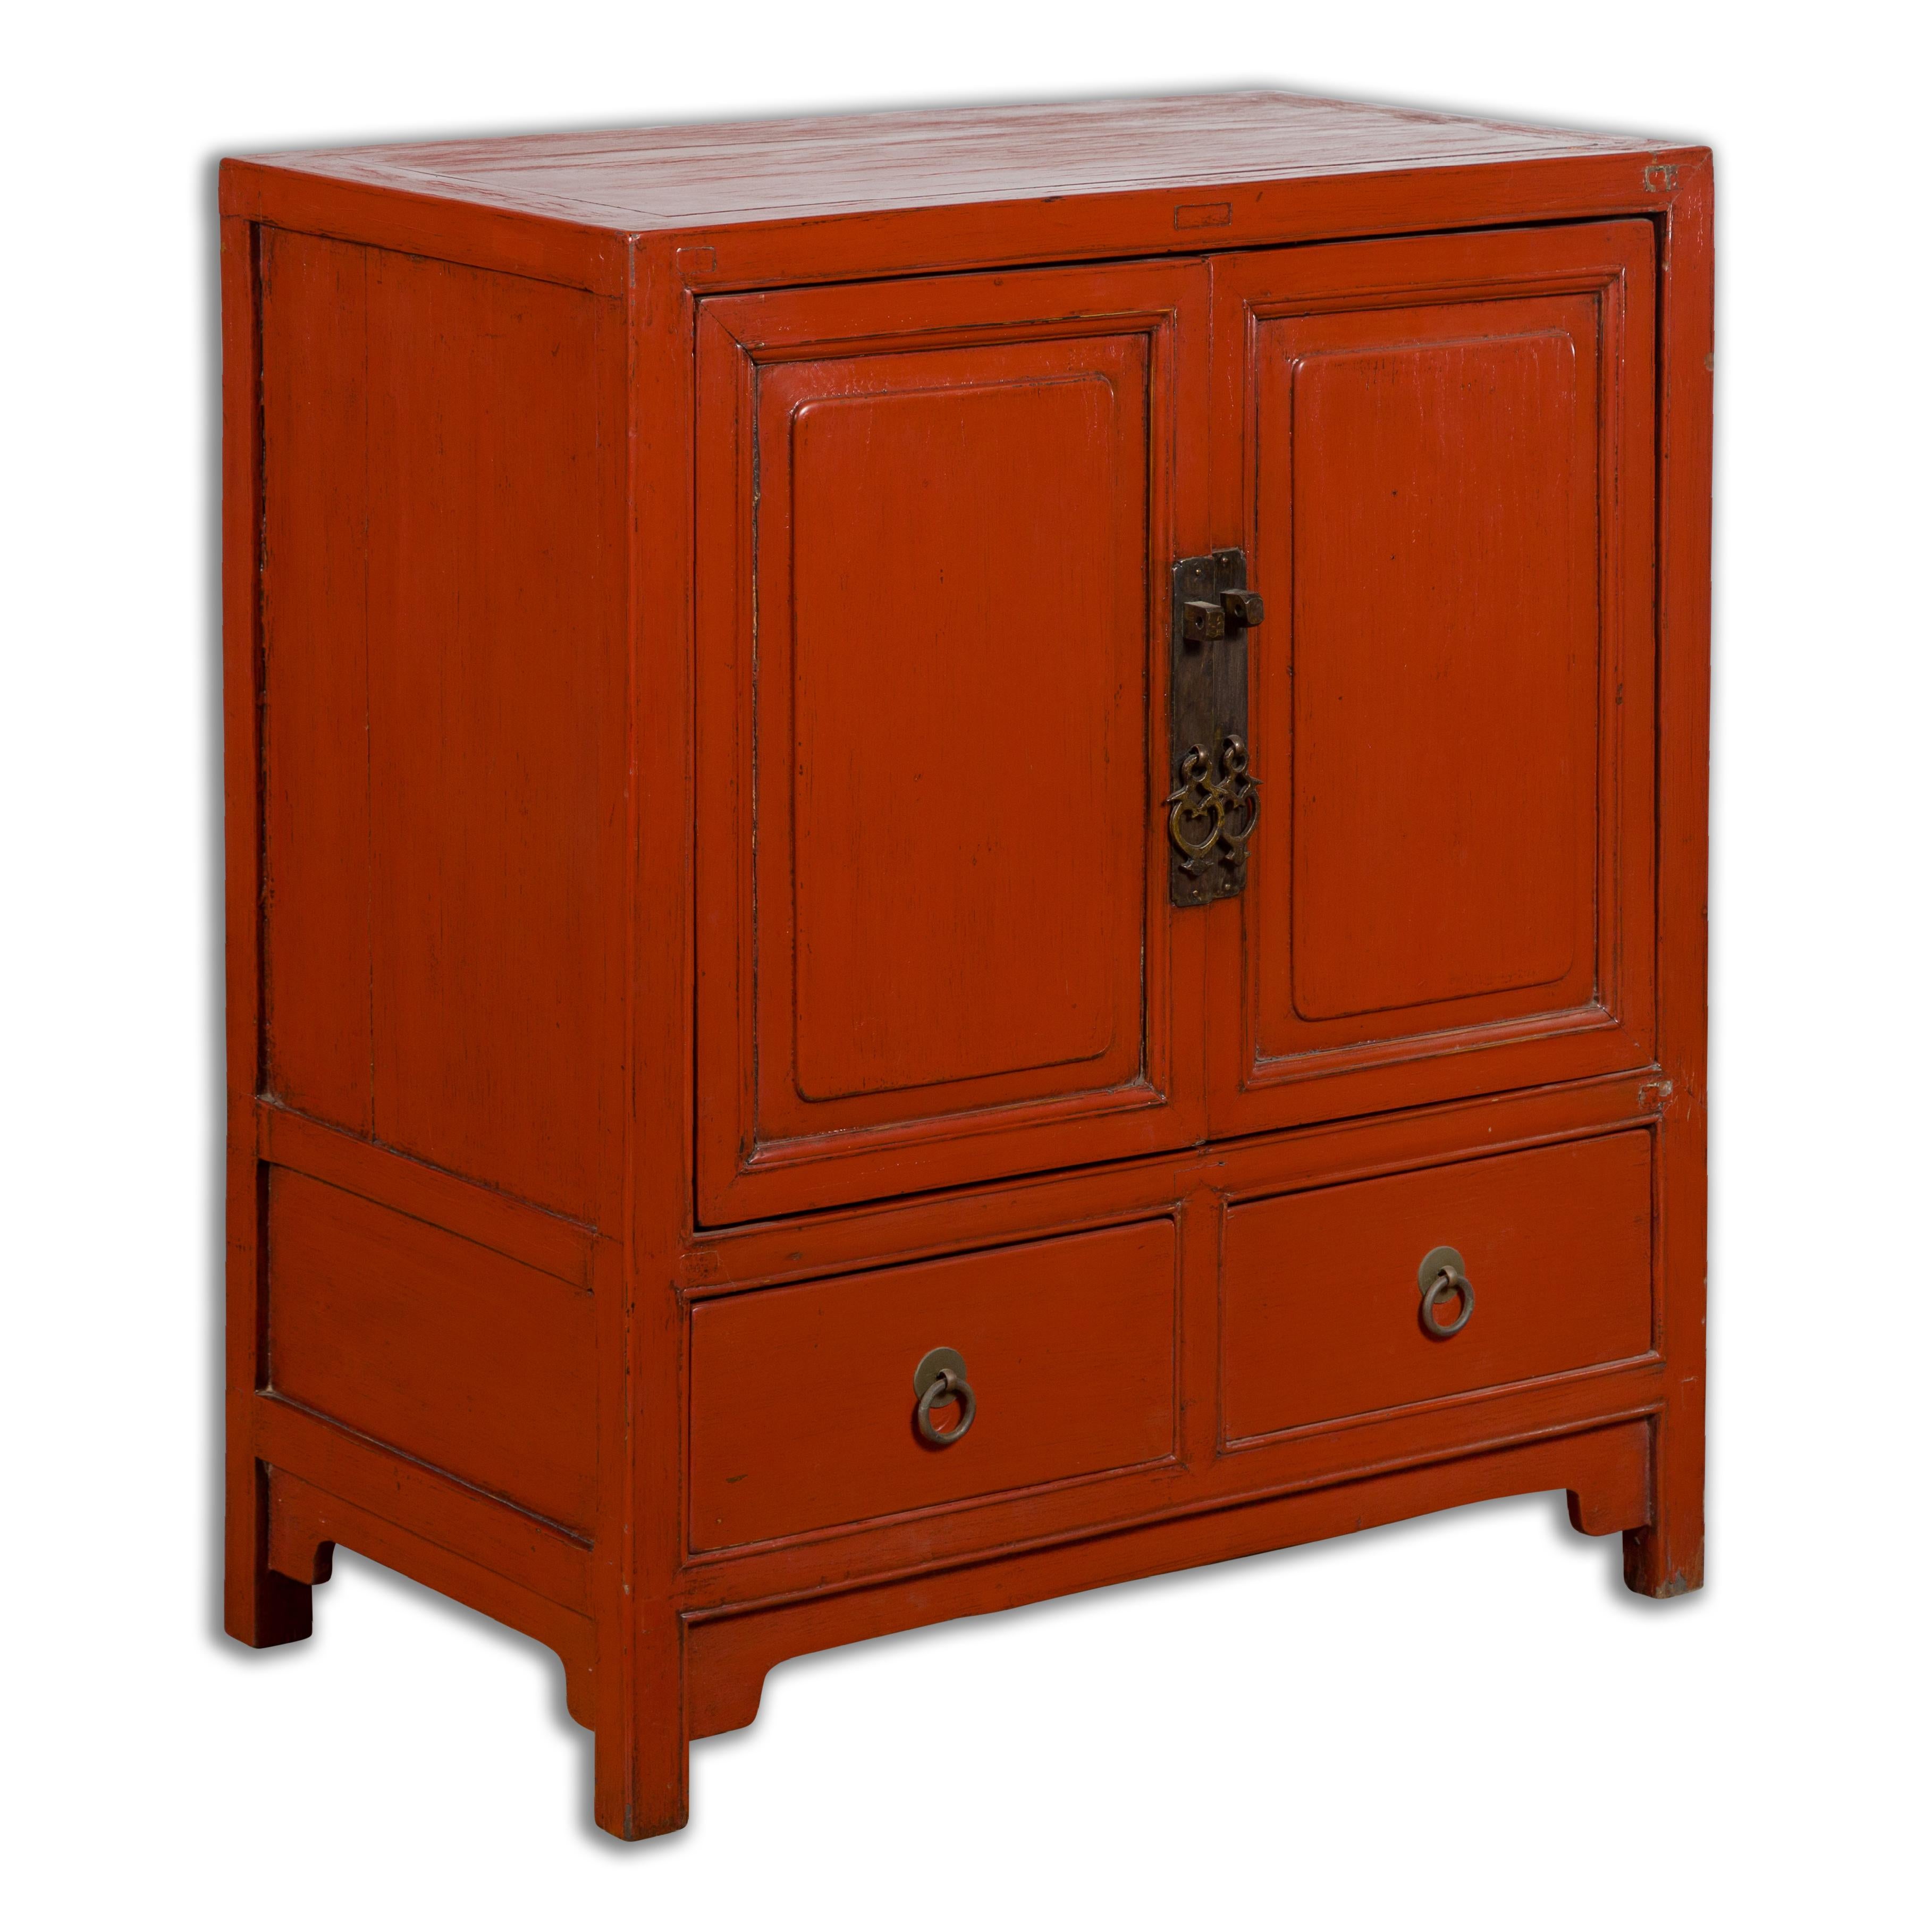 Chinese Qing Dynasty 19th Century Red Lacquer Cabinet with Doors and Drawers For Sale 11